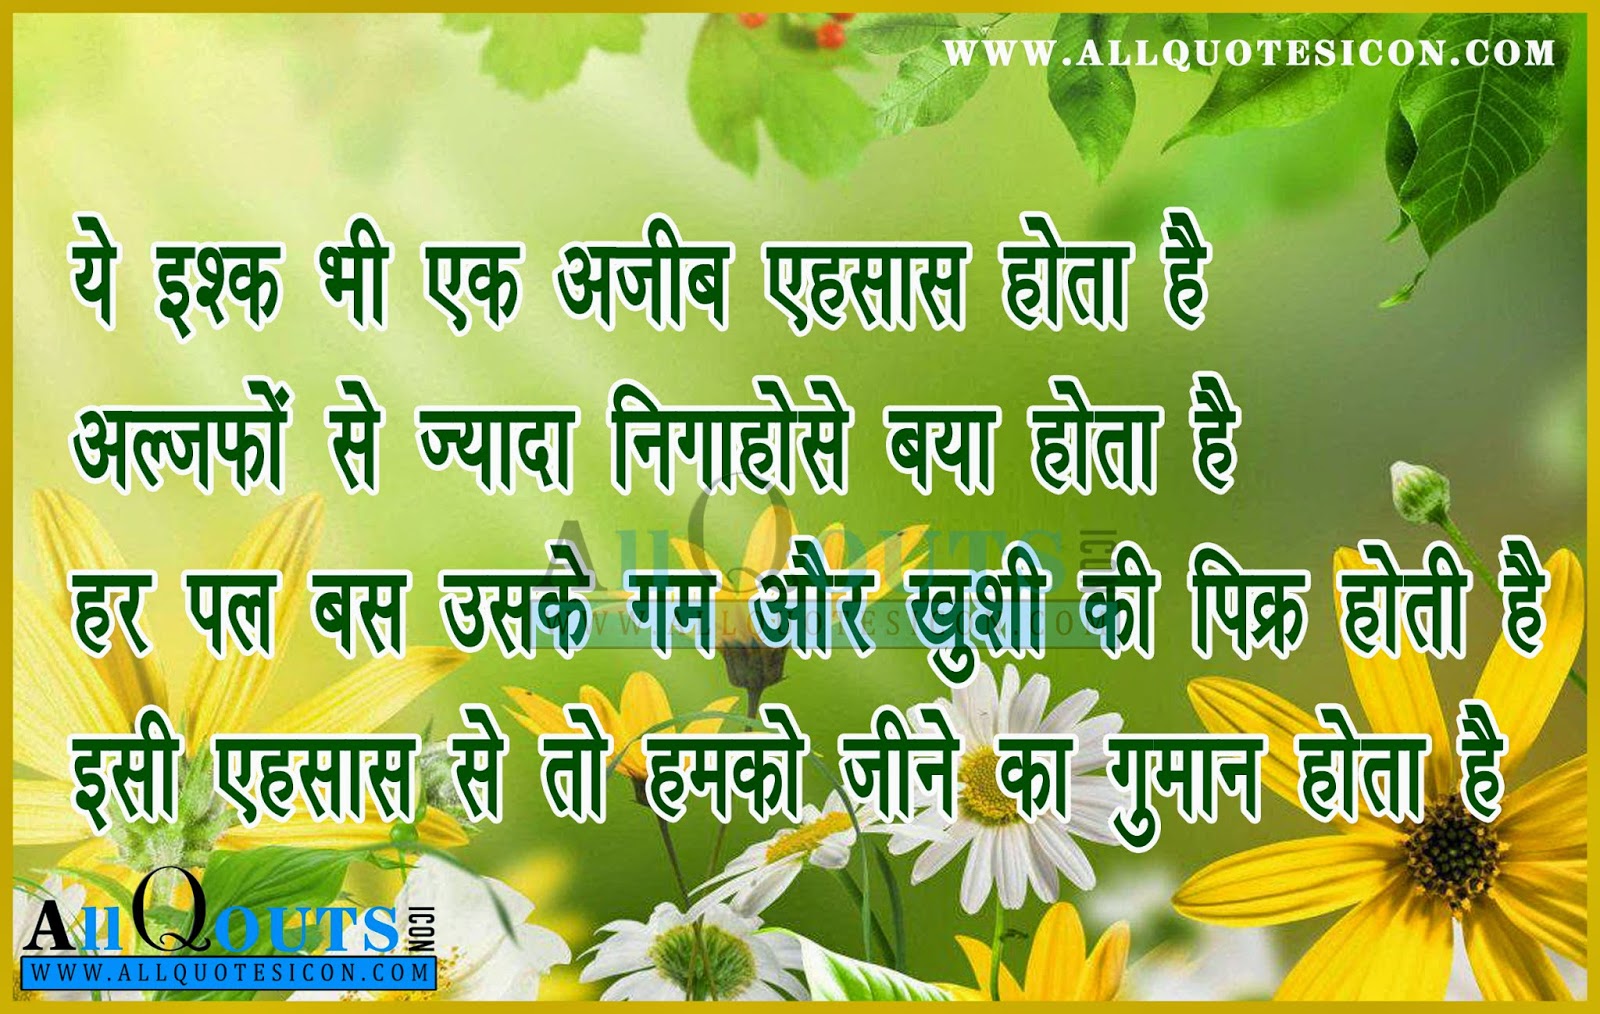 Hindi quotes images thoughts Love Friendship inspiration motivation